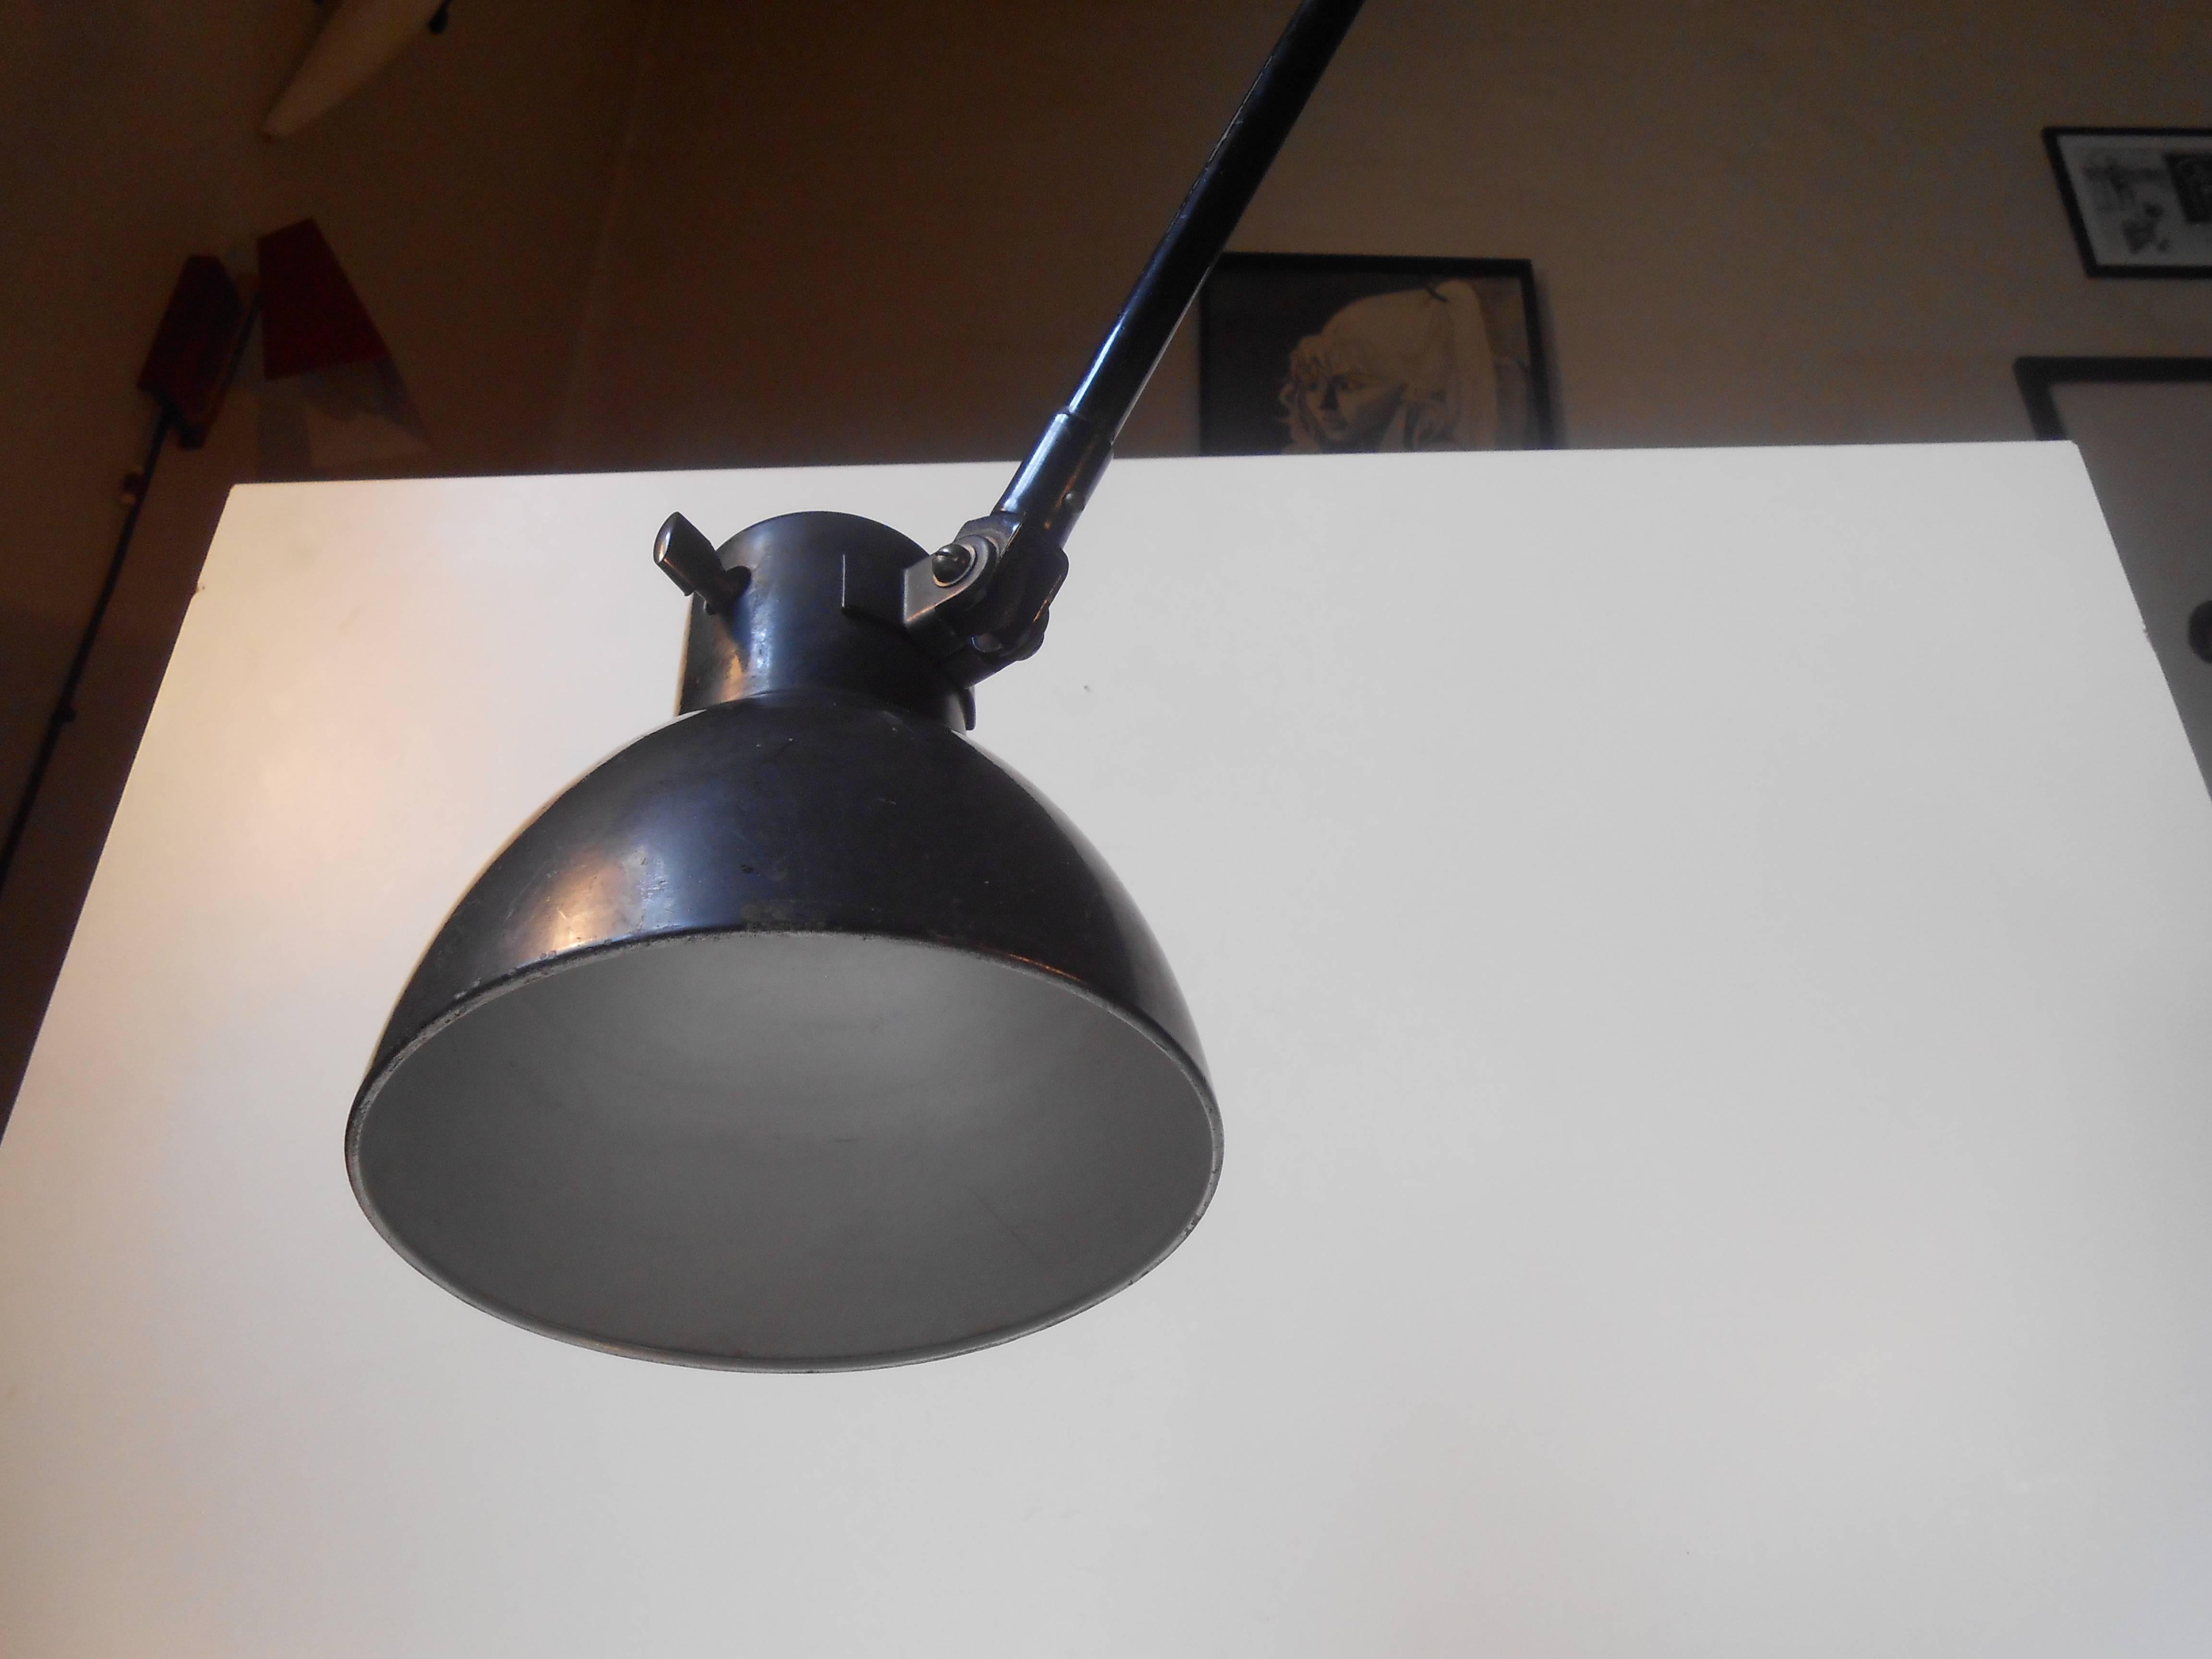 Mid-20th Century Black Industrial Bauhaus Desk or Wall Lamp by Marianne Brandt, Kandem, 1930s For Sale